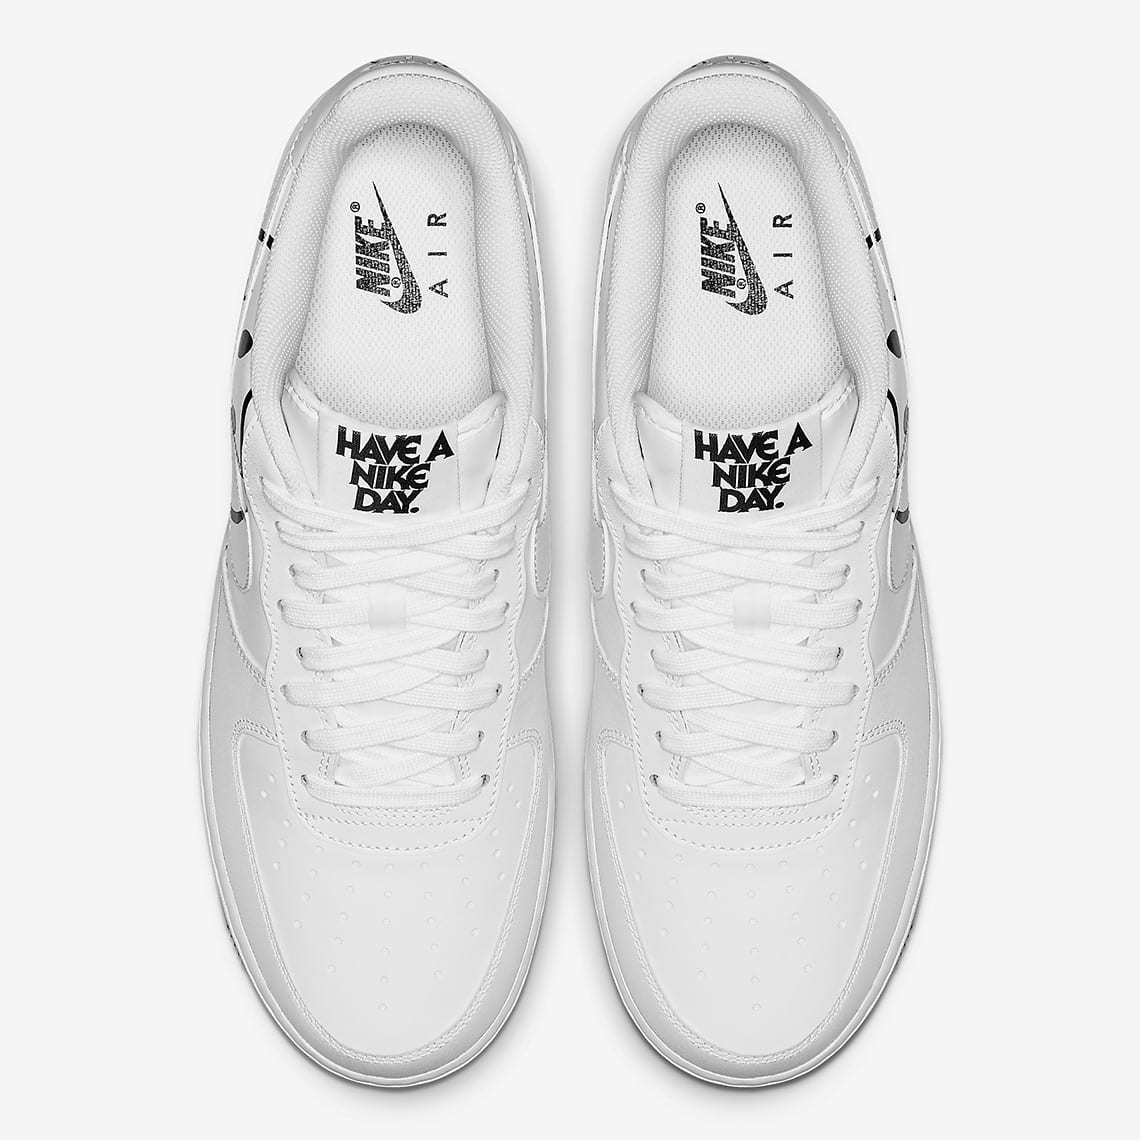 nike air force 1 smiley women's